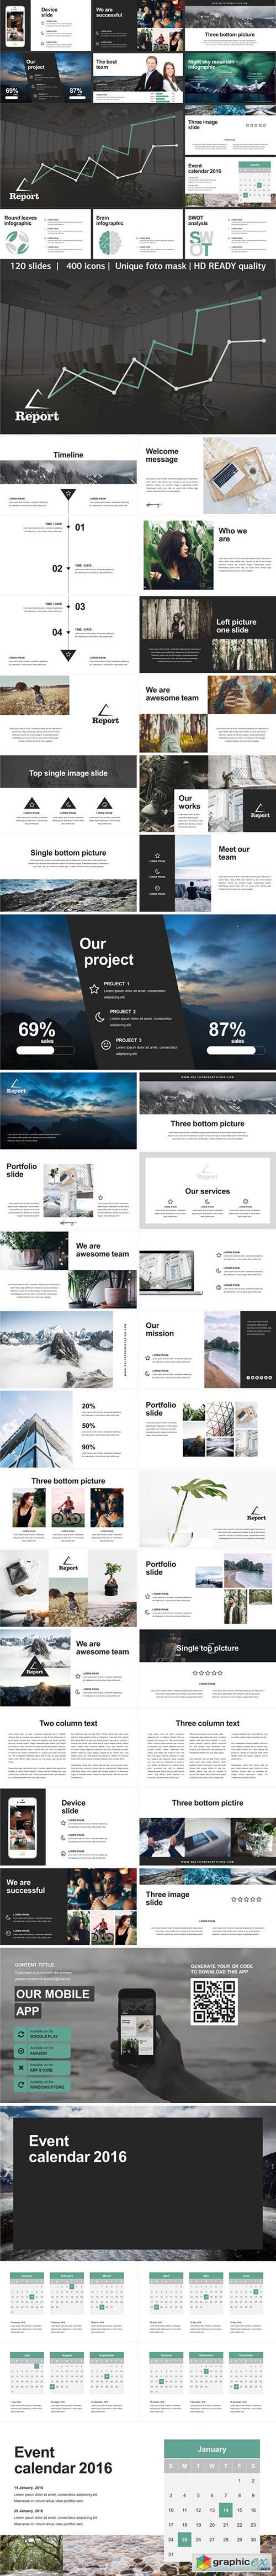 Annual Report - Premium and Easy to Edit Template